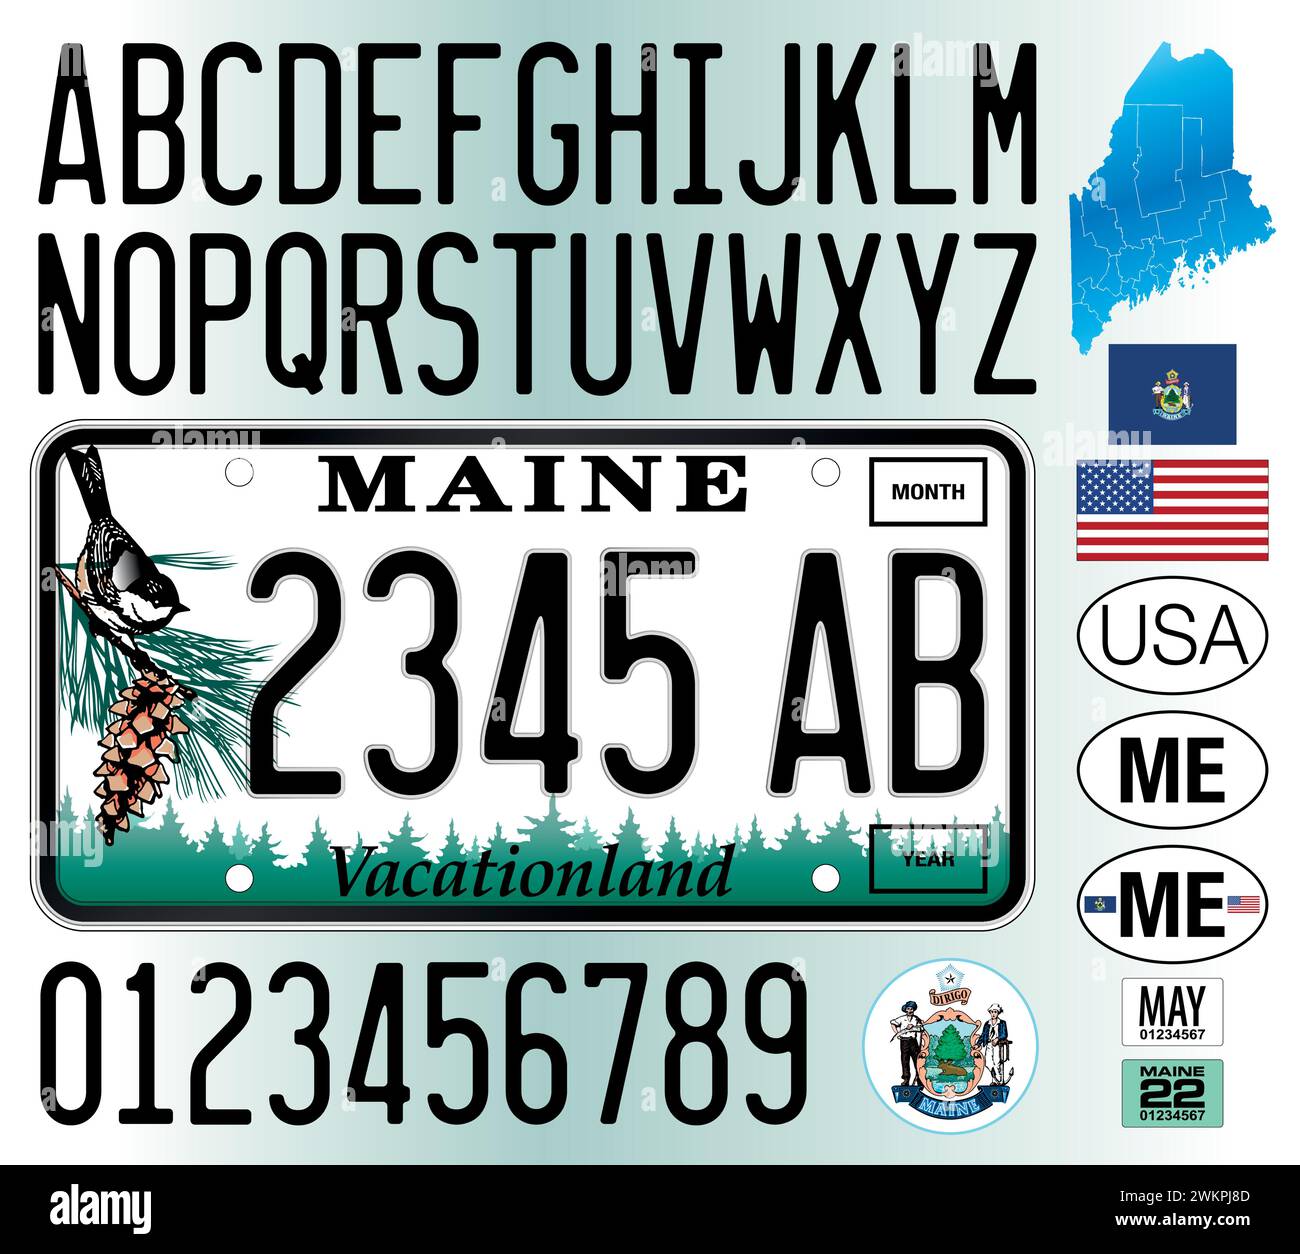 Maine car license plate pattern, letters, numbers and symbols, vector illustration, United States Stock Vector